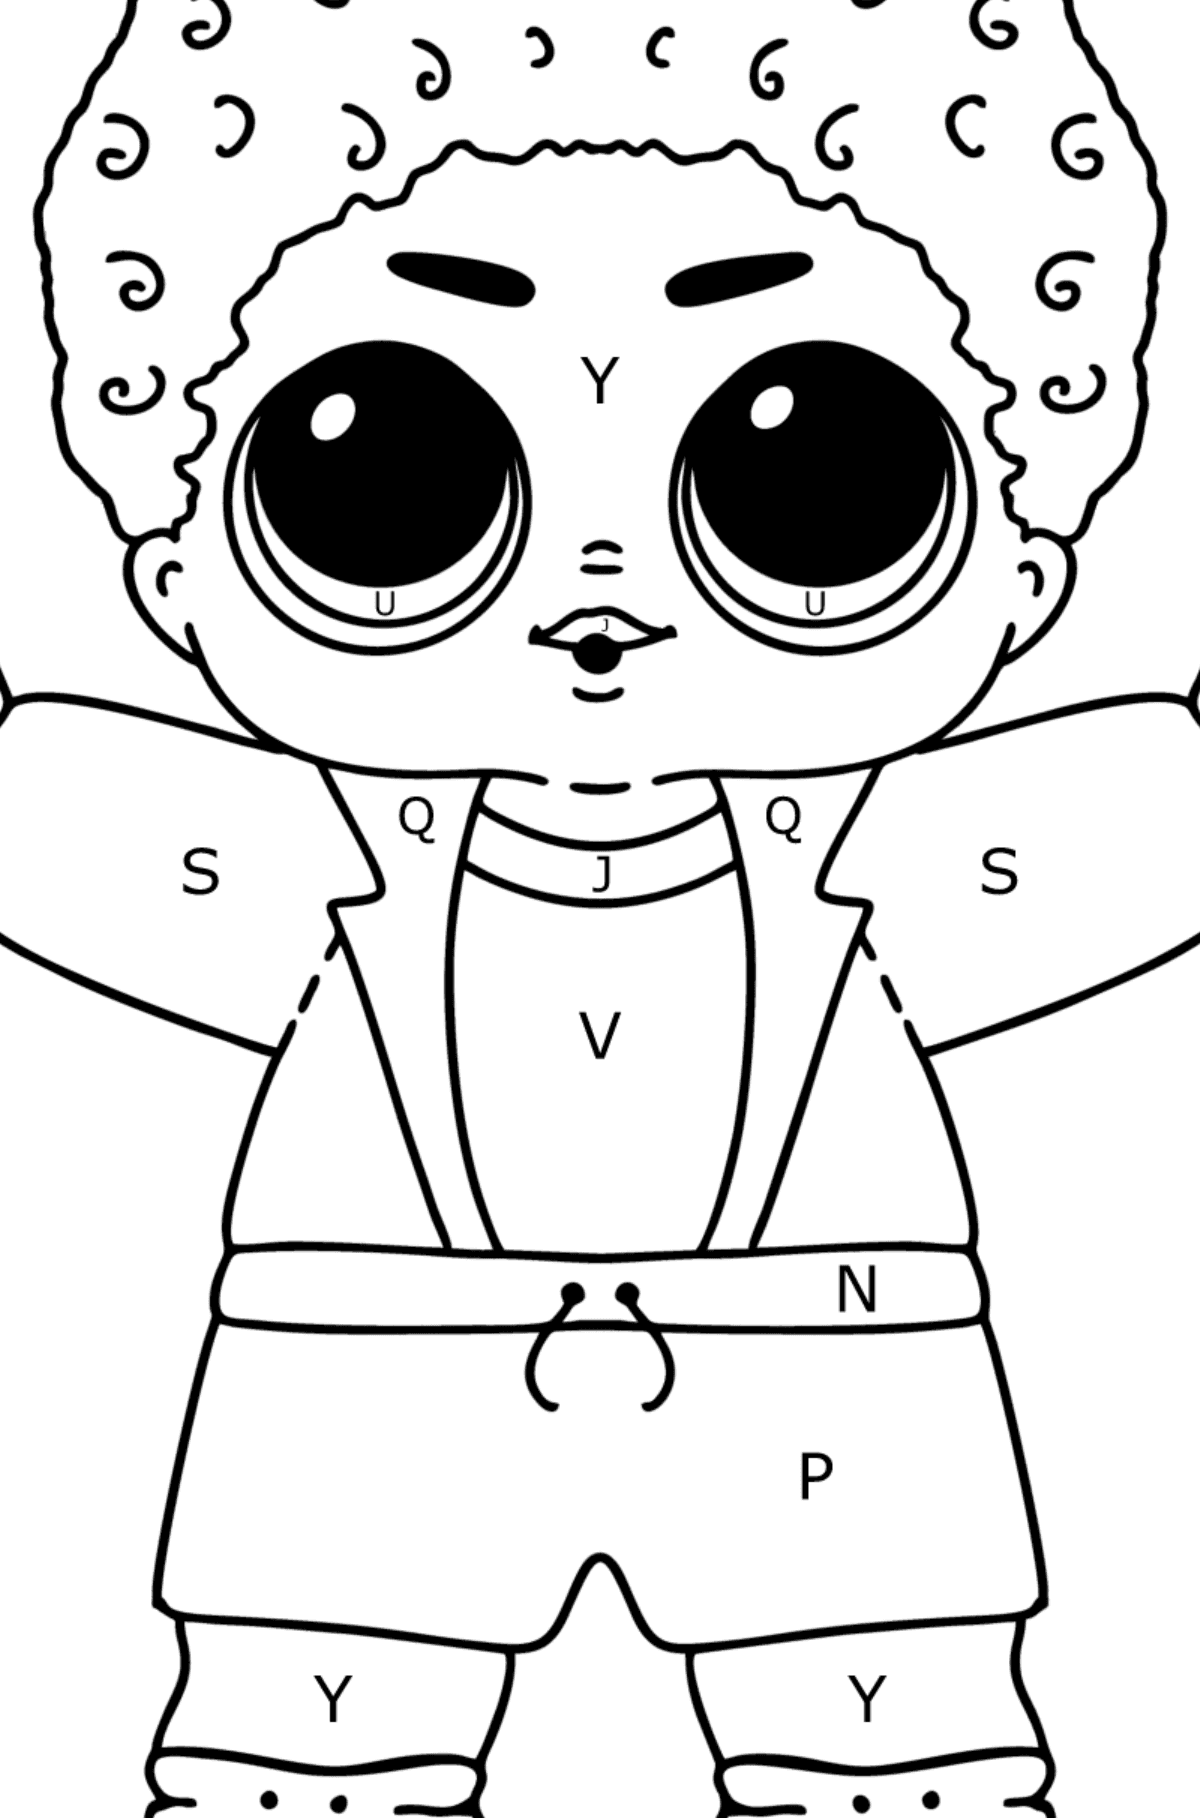 Coloring page LOL boy King - Coloring by Letters for Kids